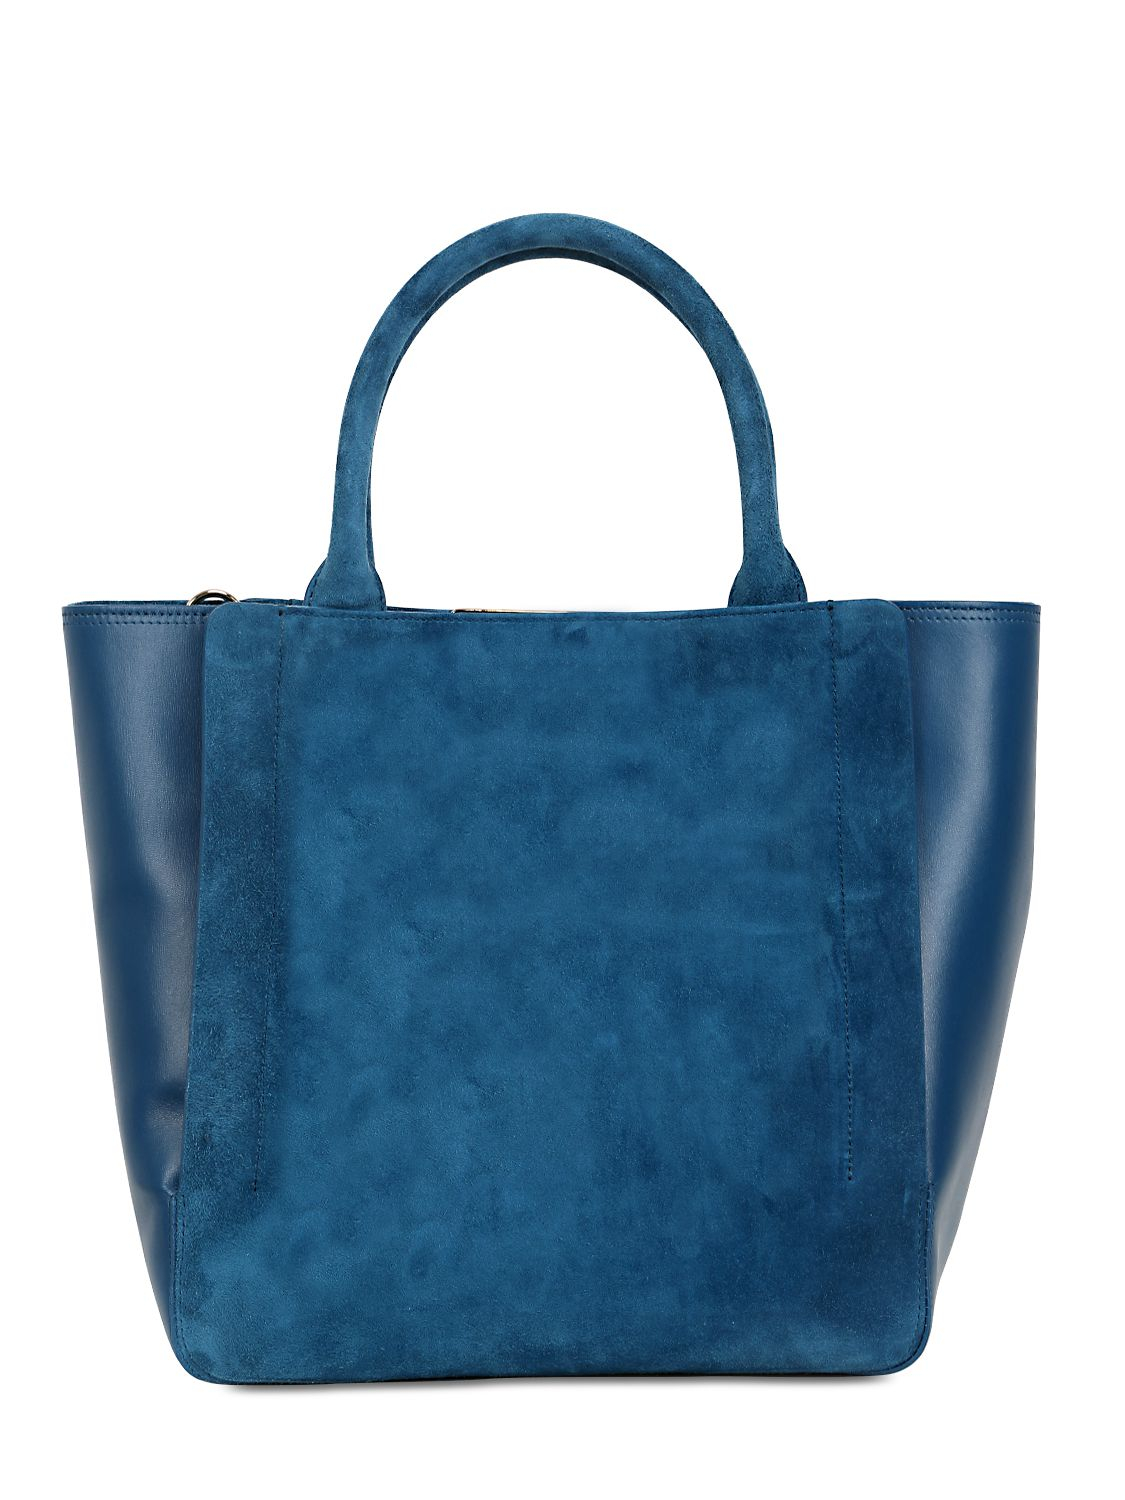 Lyst - Roger Vivier Small Ines Suede Leather Tote Bag in Blue